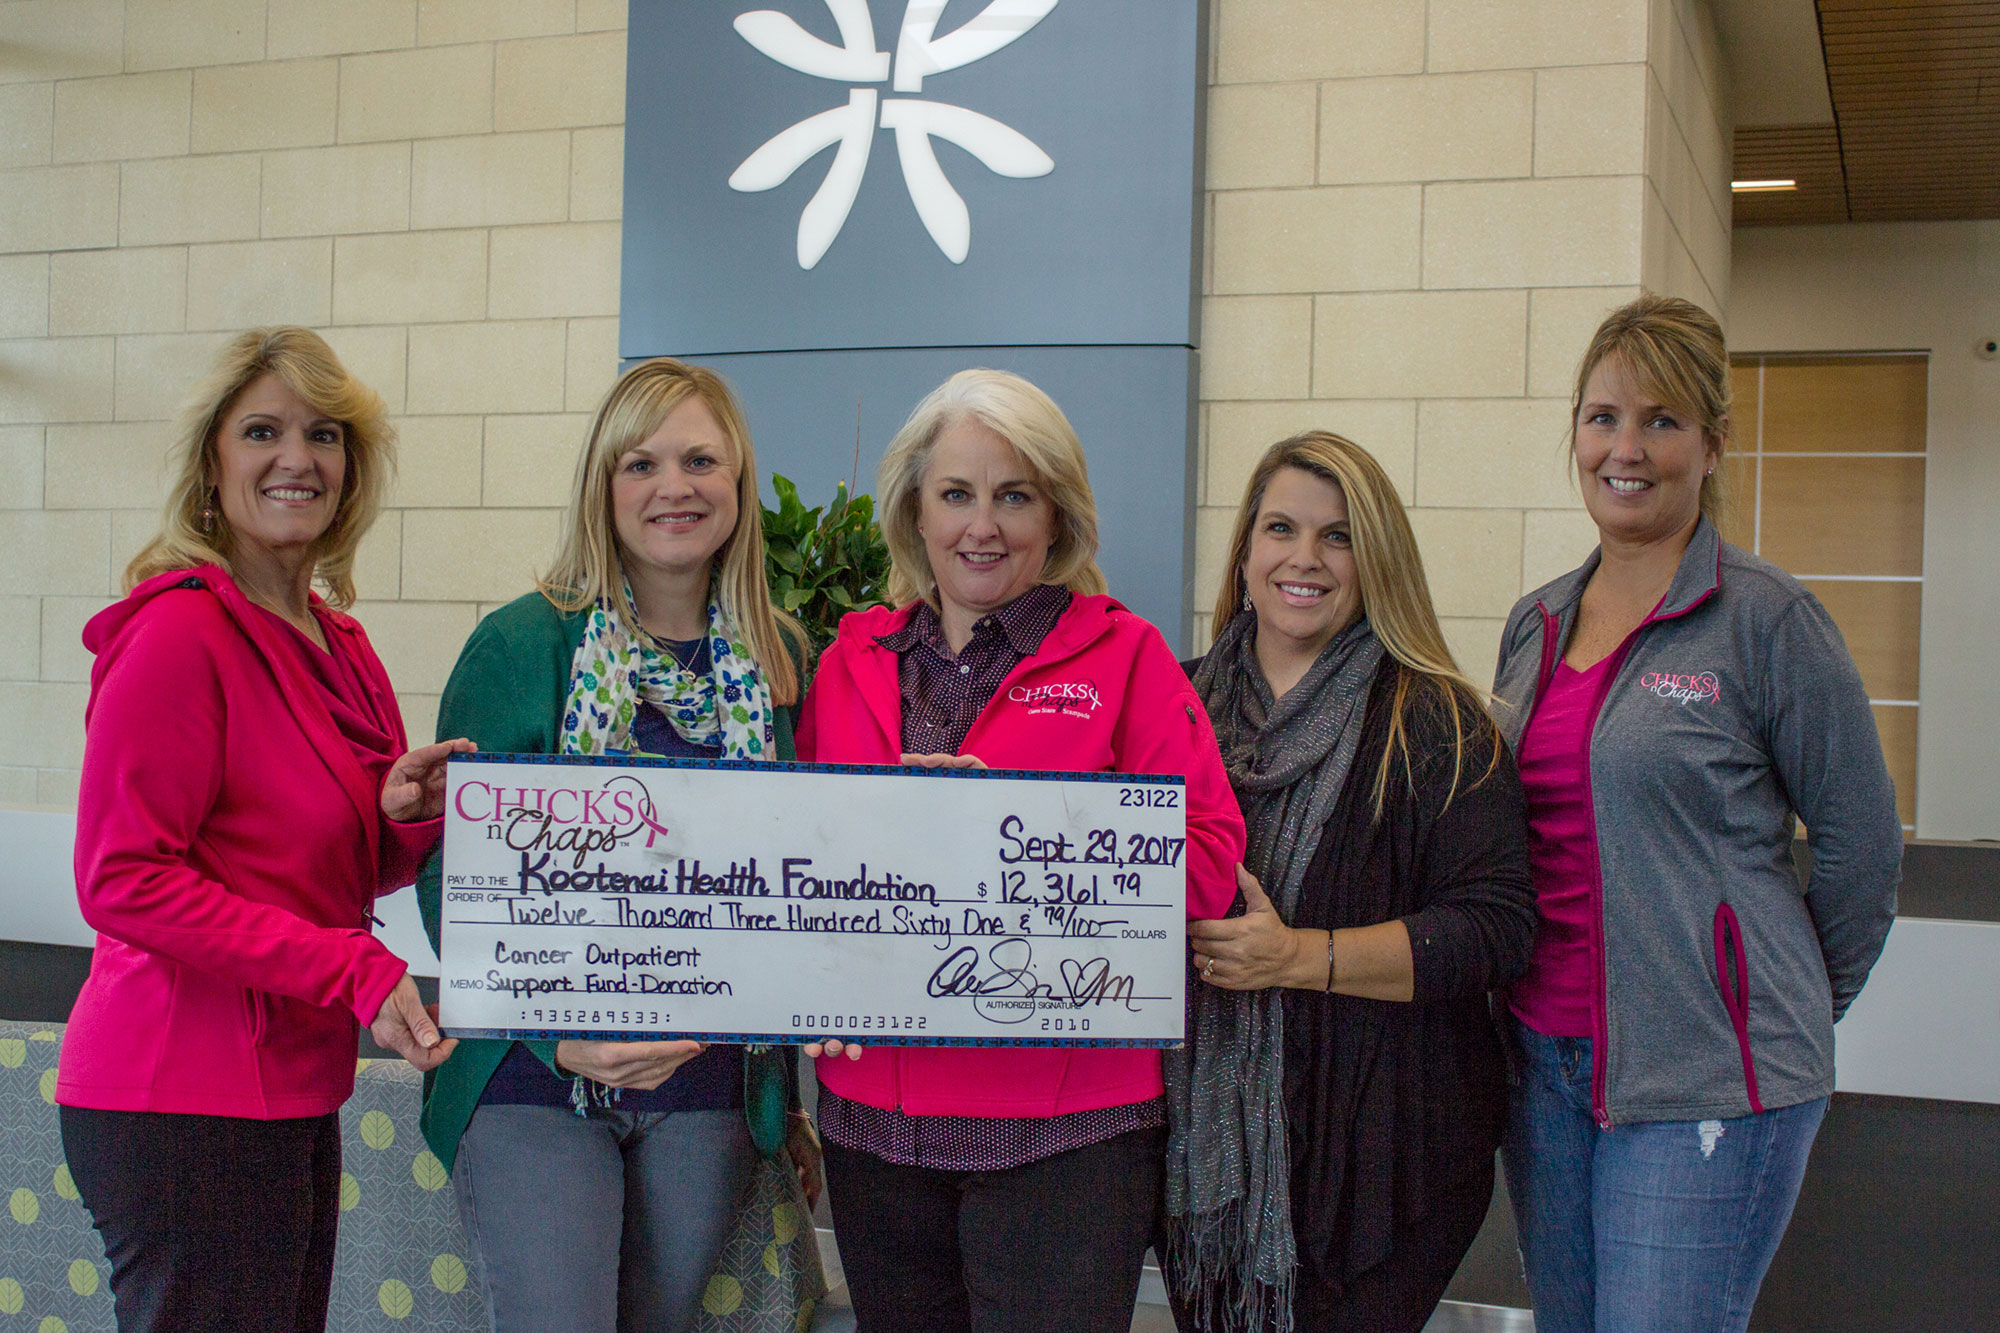 Chicks n’ Chaps donates to Cancer Patient Support Fund